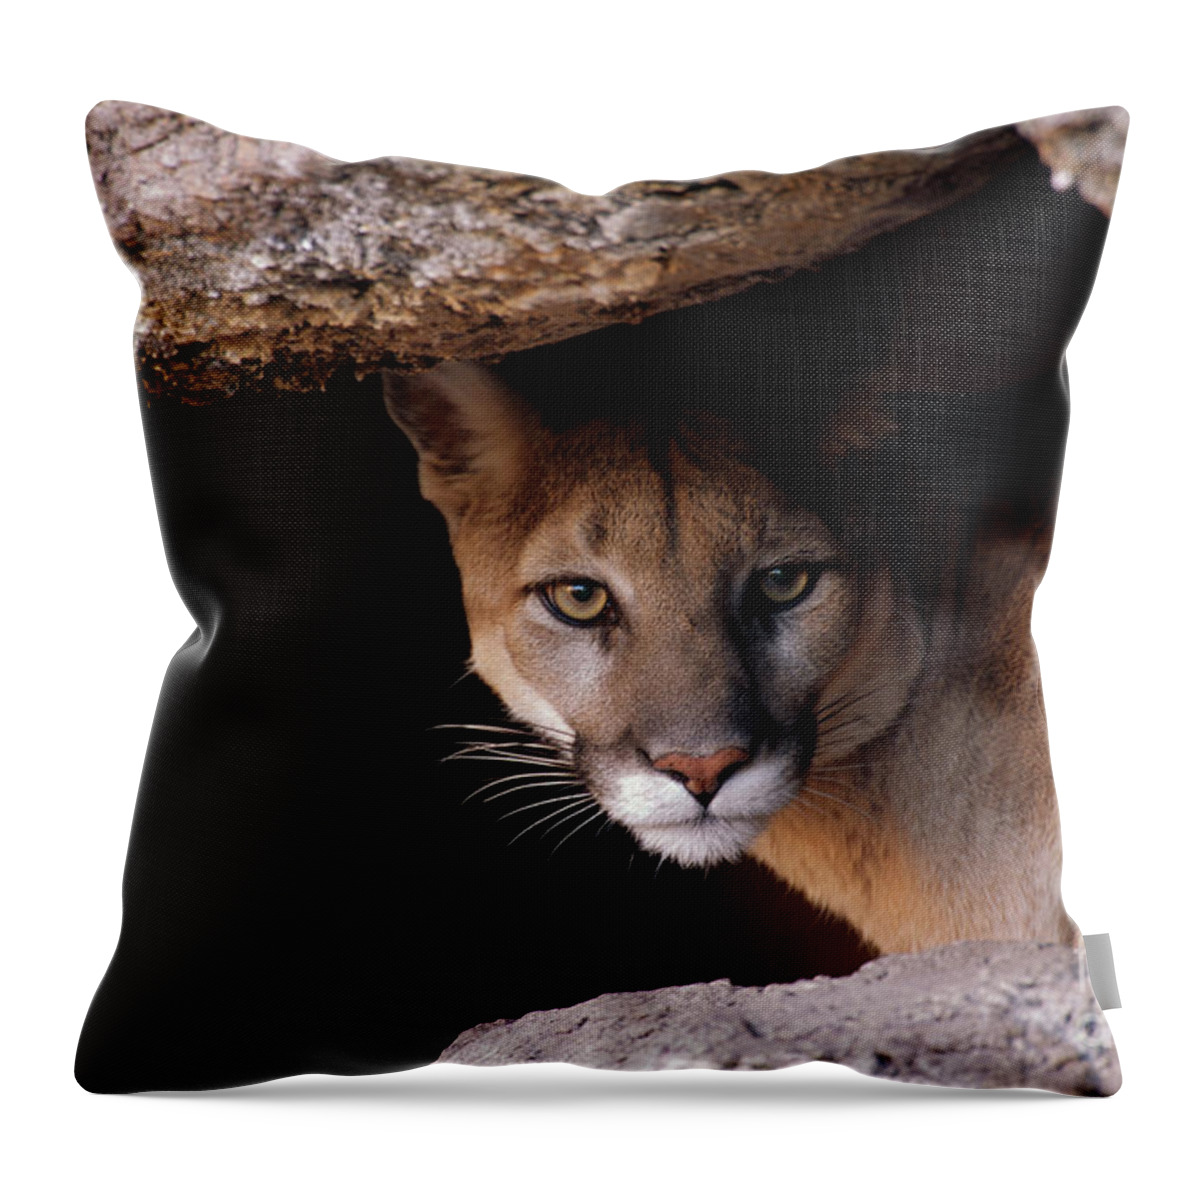 00343595 Throw Pillow featuring the photograph Mountain Lion Peering From Cave by Yva Momatiuk John Eastcott